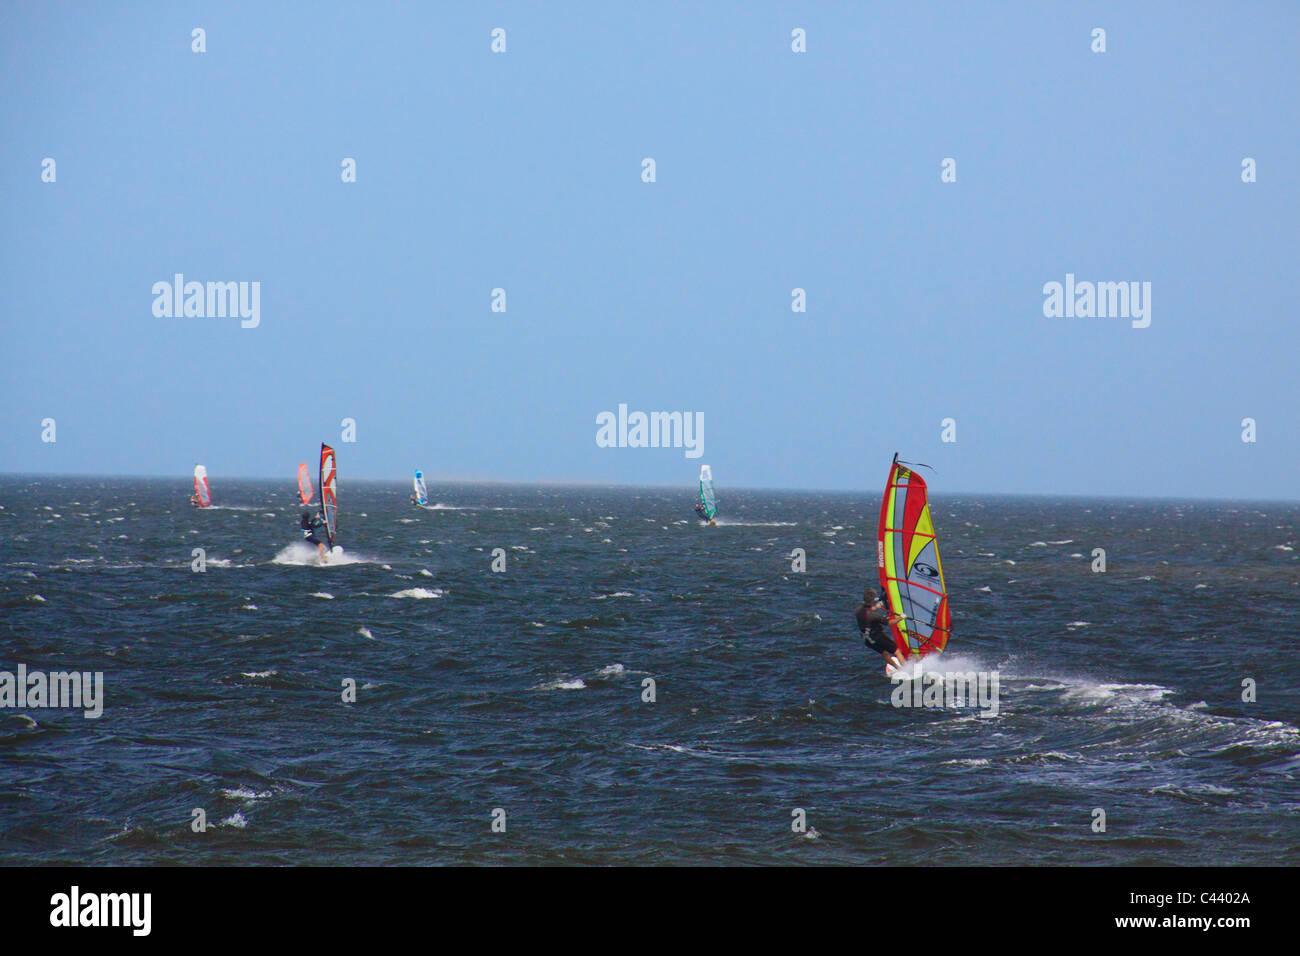 Wind Surfing, Pamlico Sound, Canadian Hole, Cape Hatteras National Seashore, Outer Banks, North Carolina, USA Stock Photo